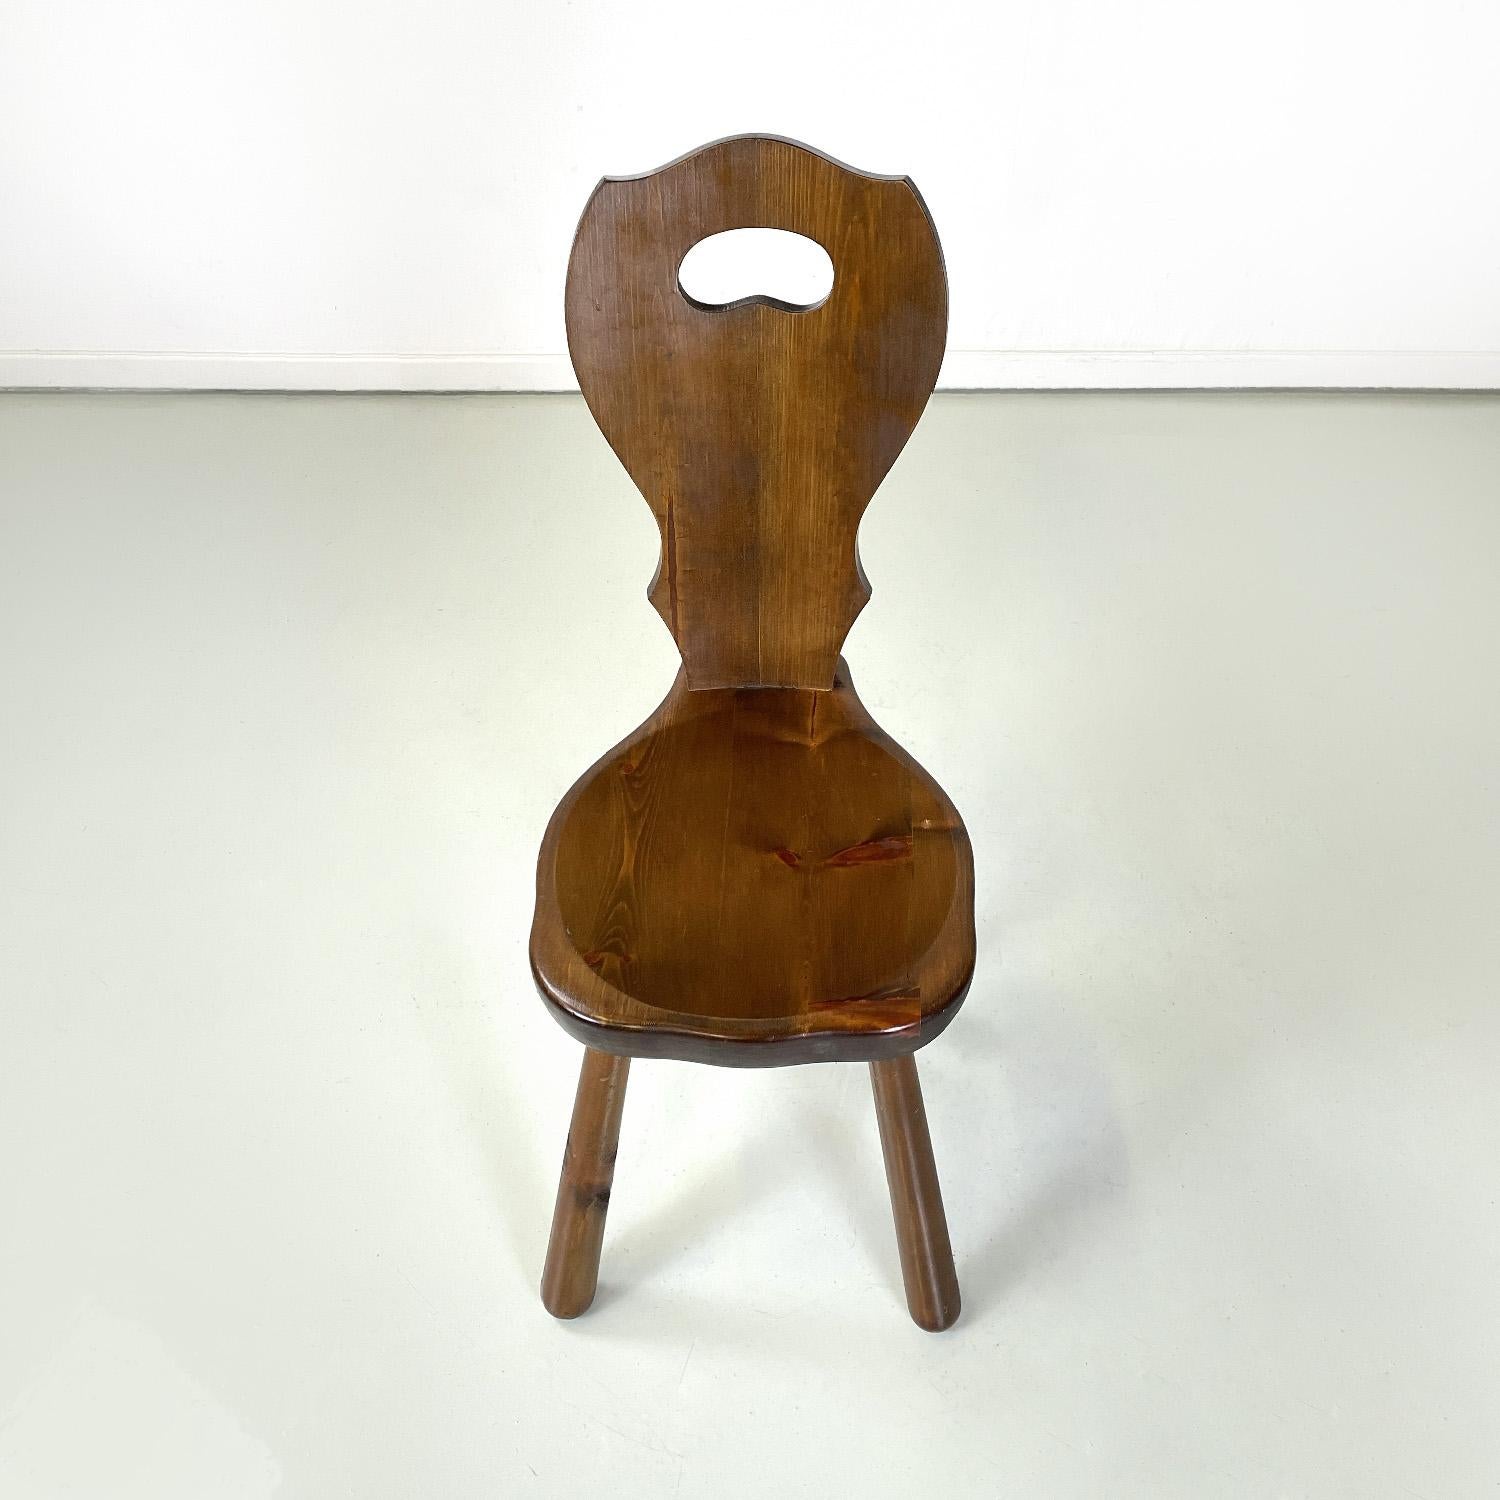 Italian Art Deco wooden chair with rounded profiles, 1940s For Sale 1